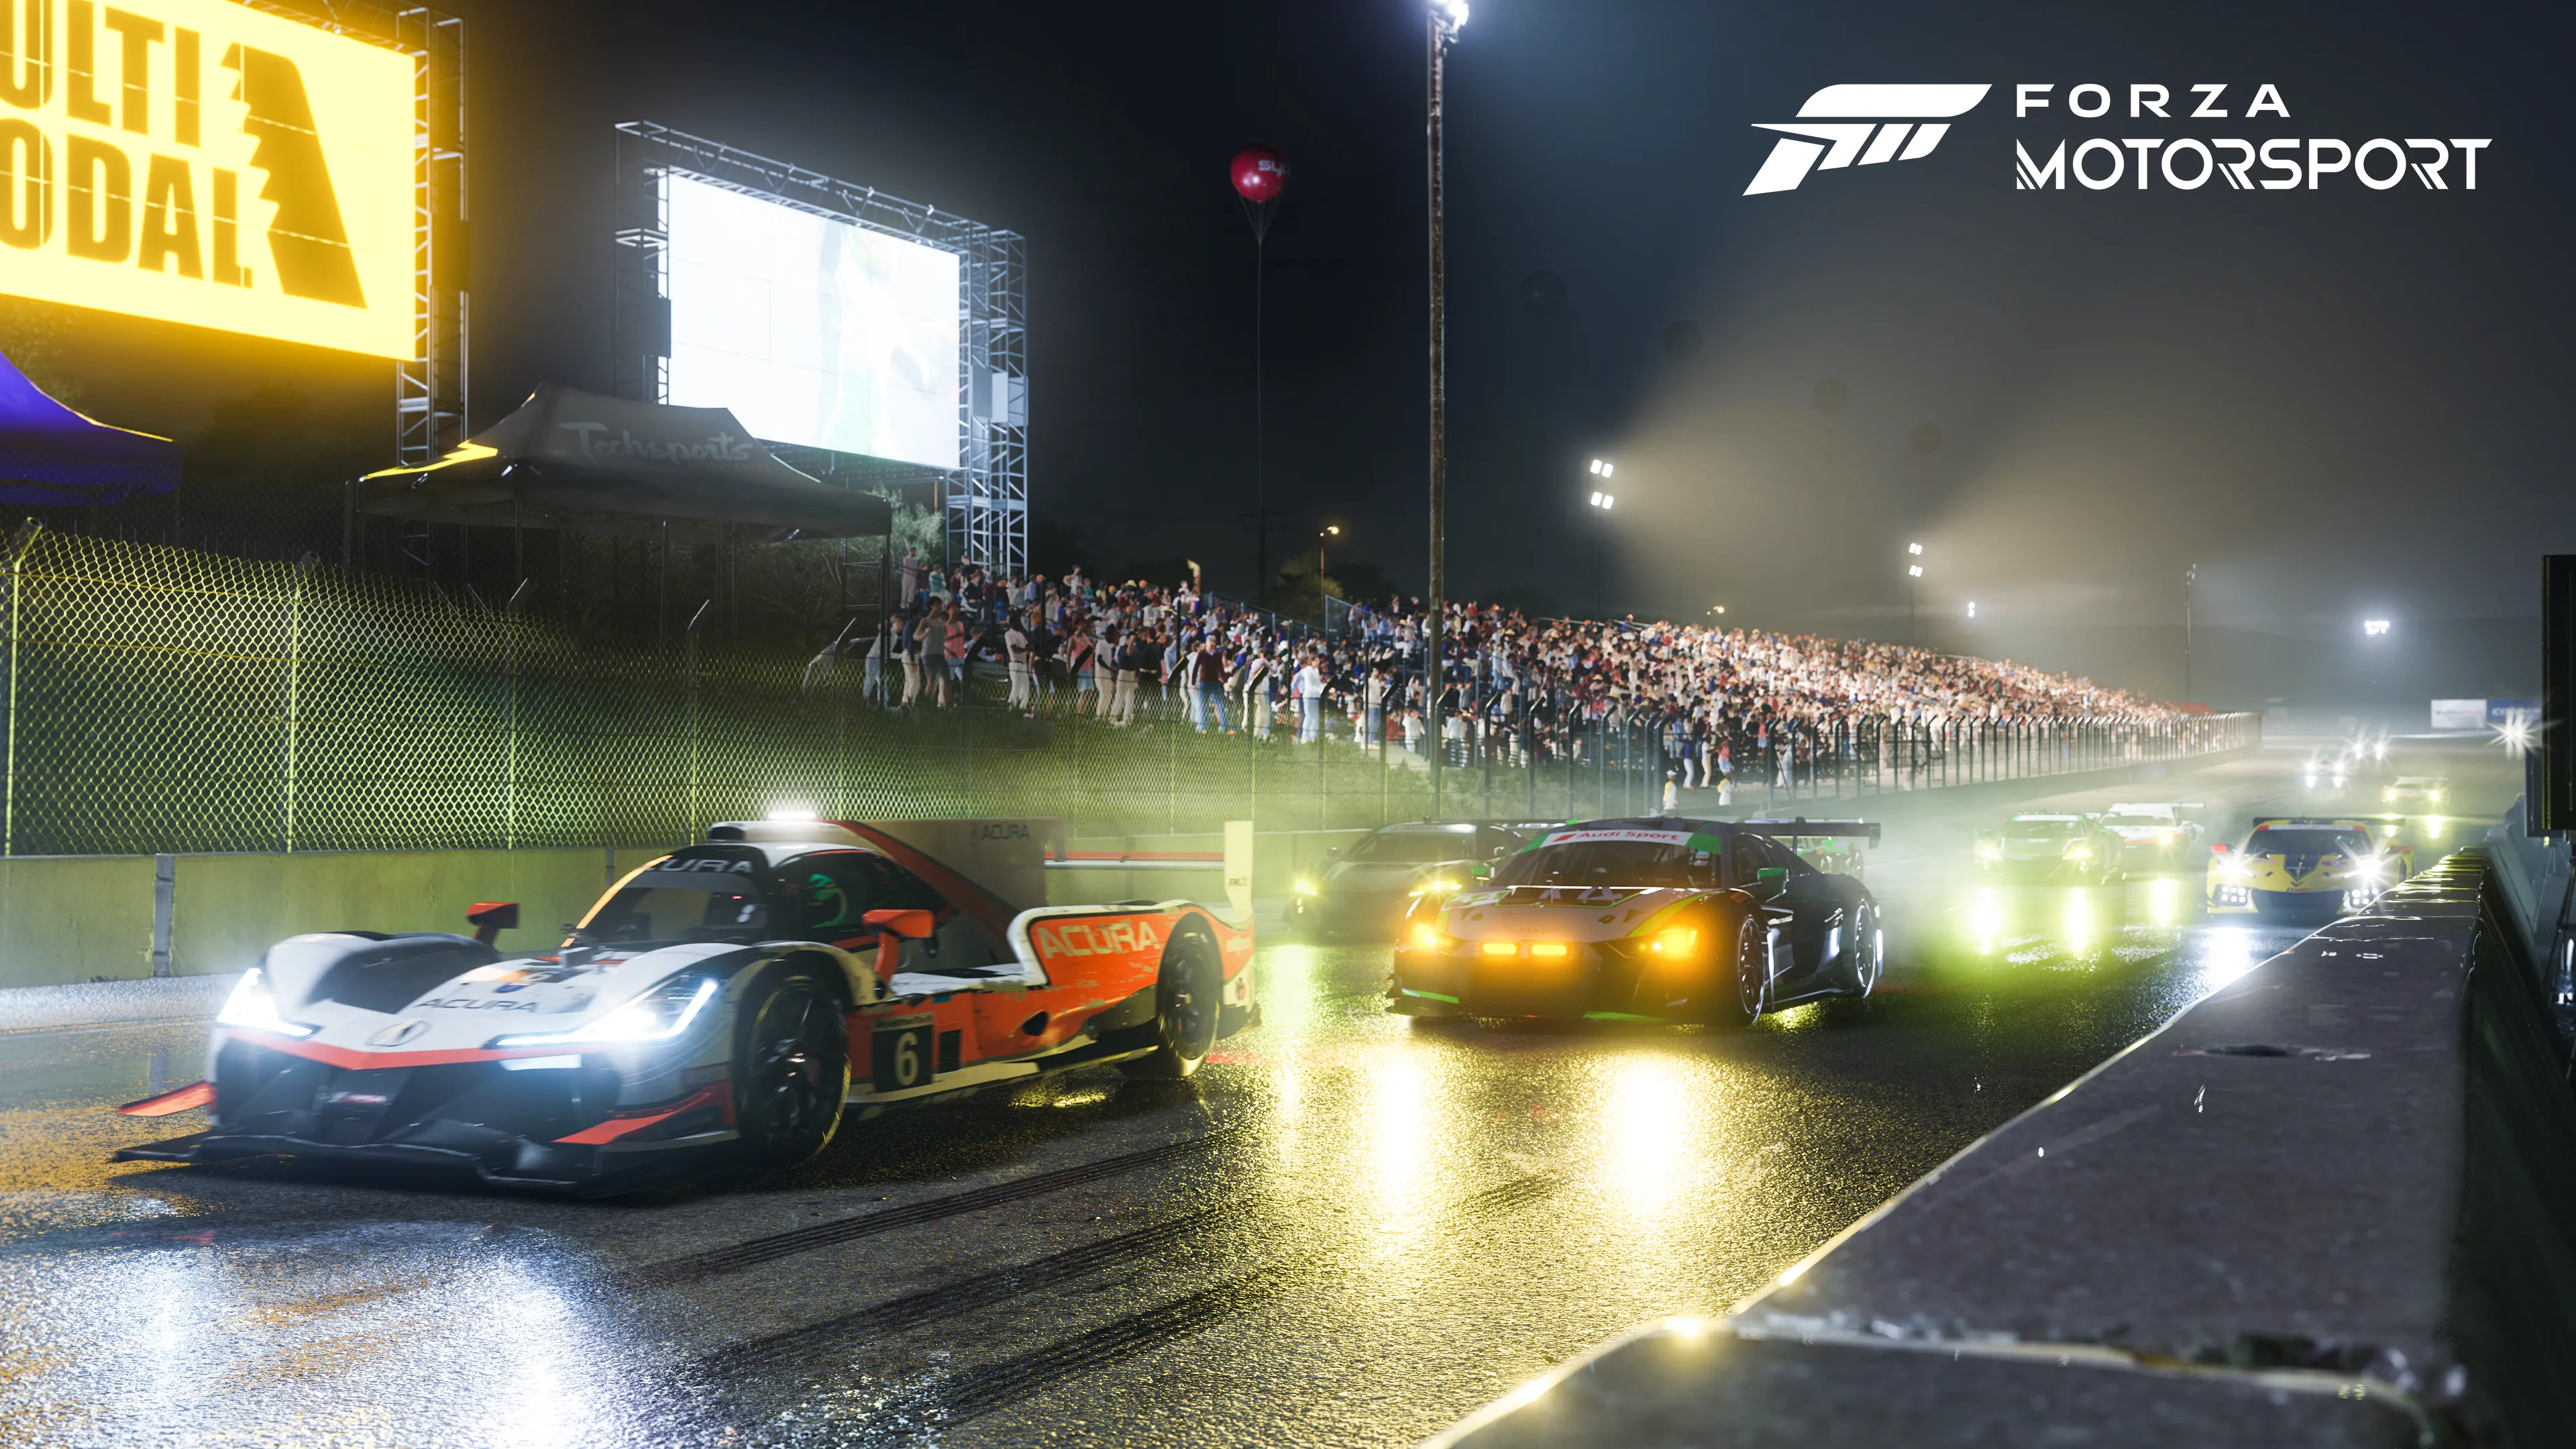 Forza Motorsport review: the racing game according to Microsoft